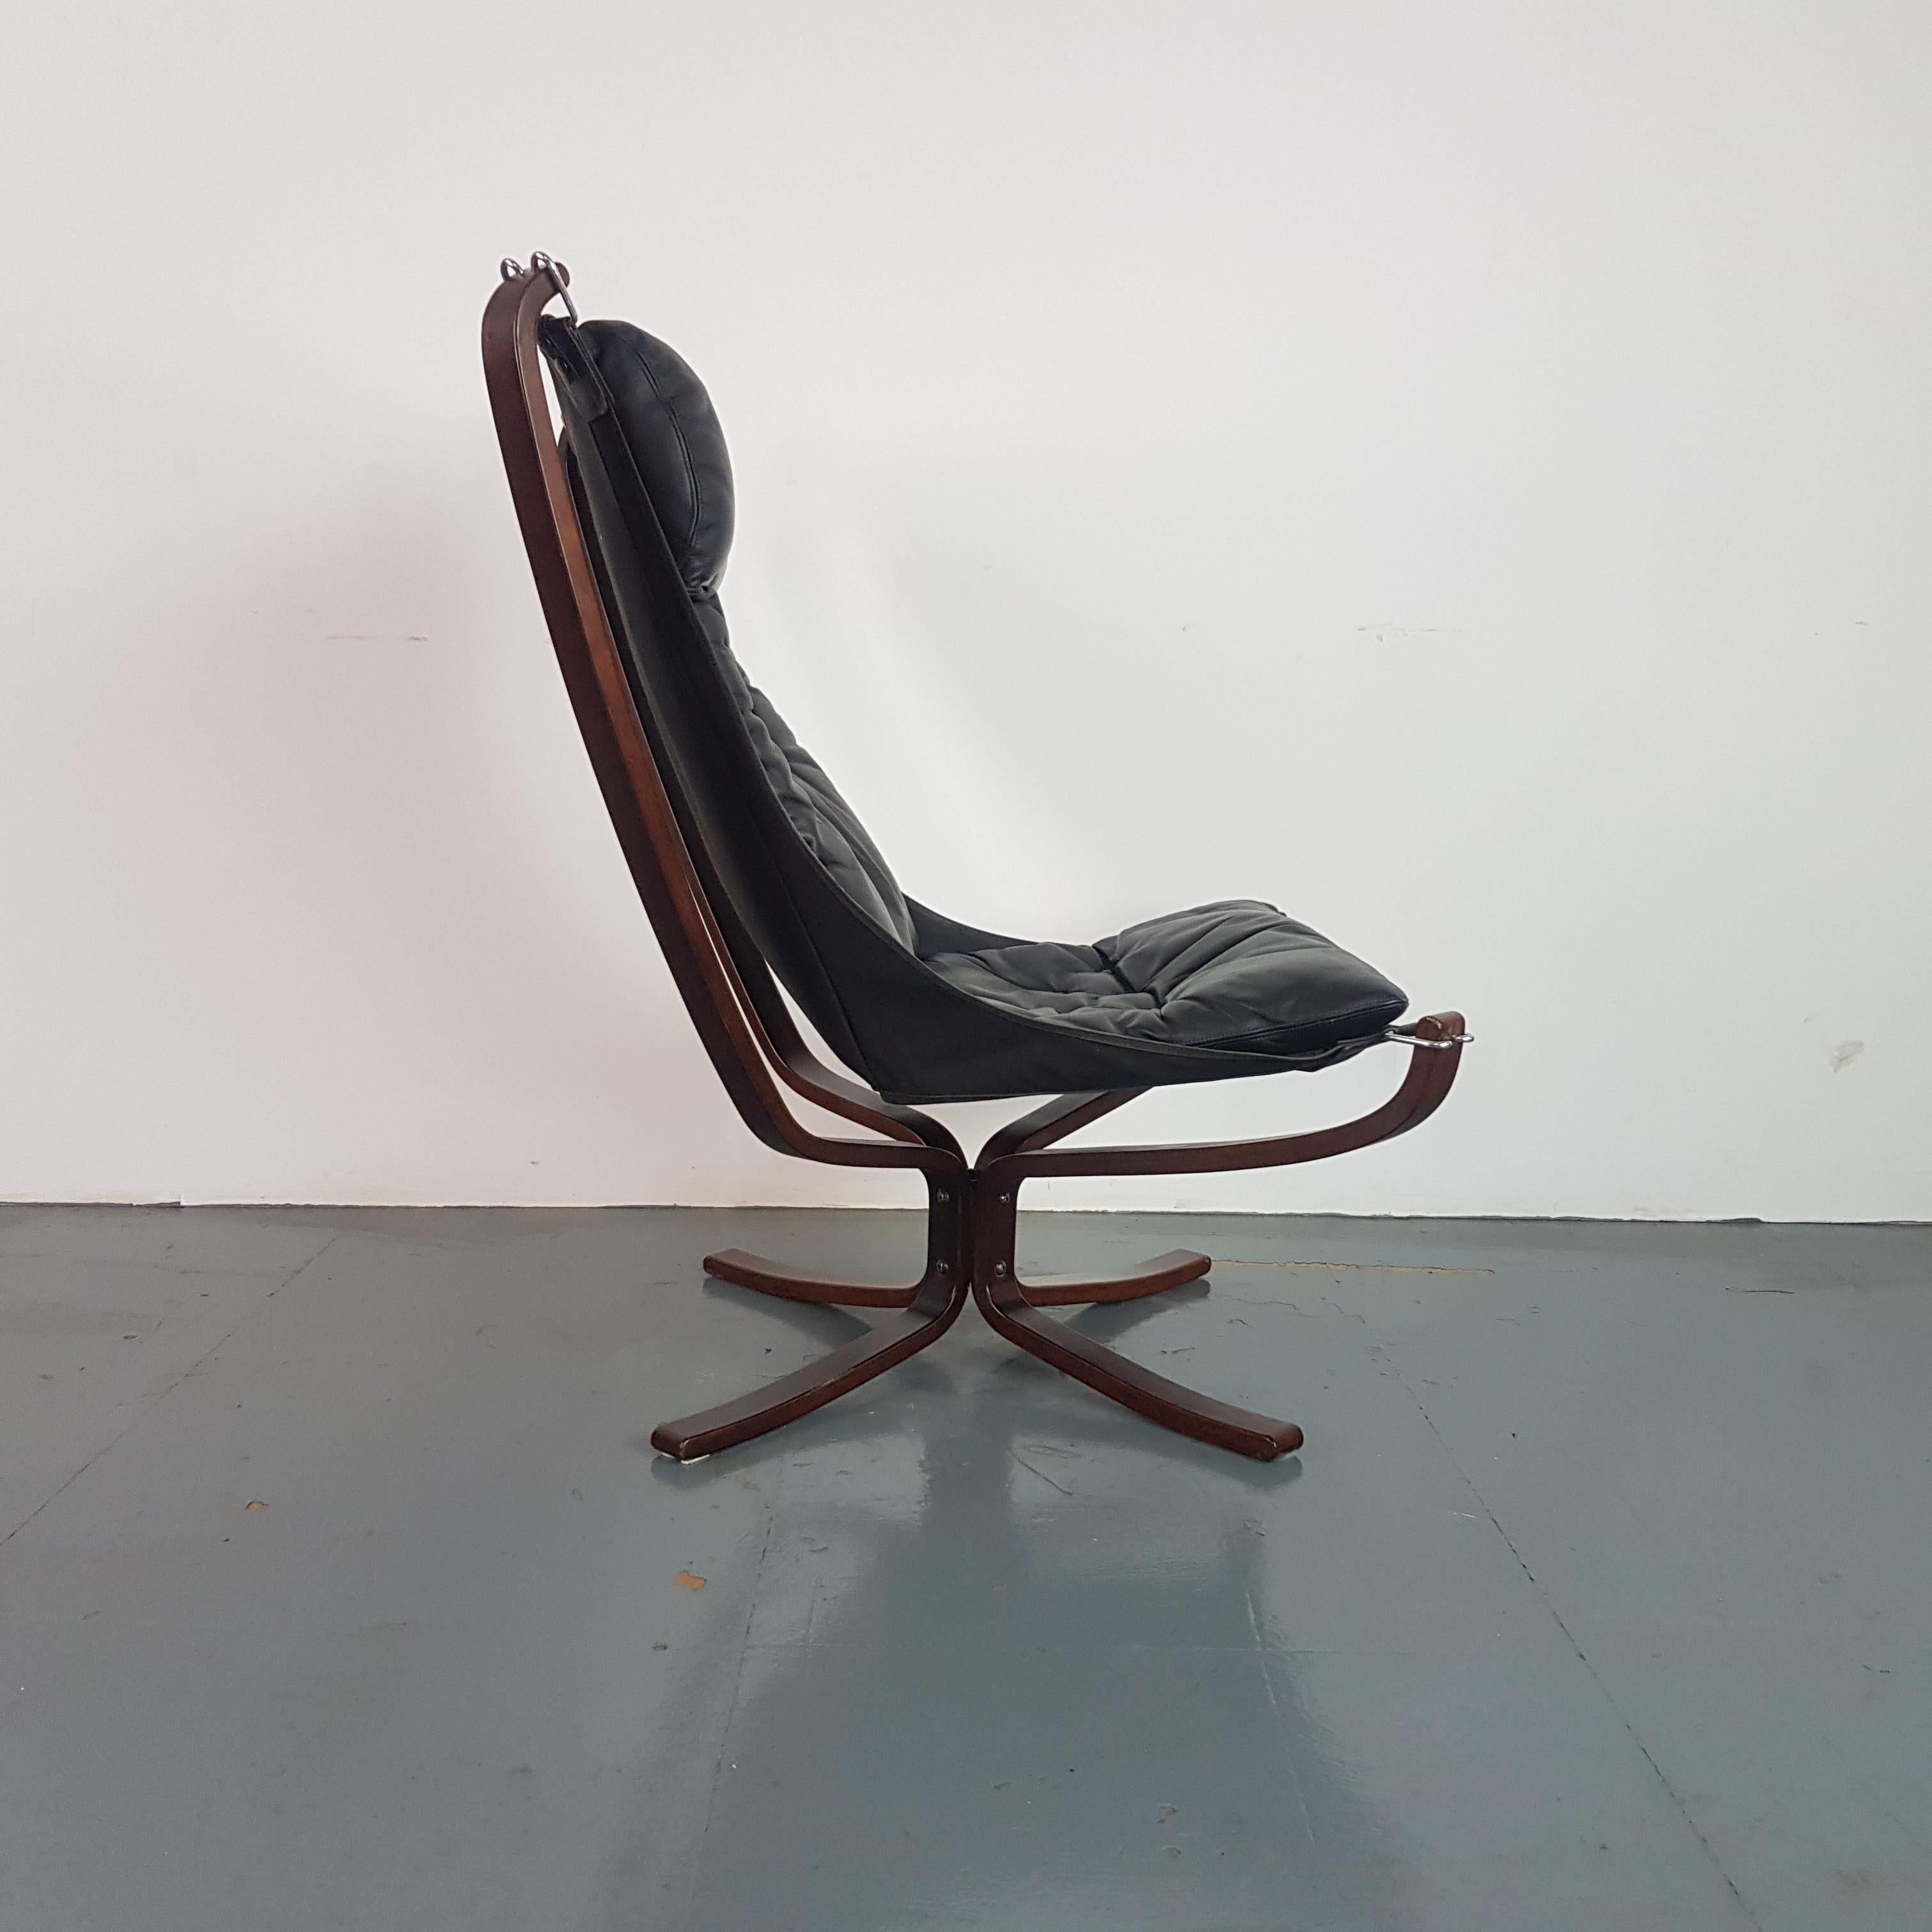 Norwegian Vintage 1970s High Back Black Leather Falcon Chair Designed by Sigurd Resell